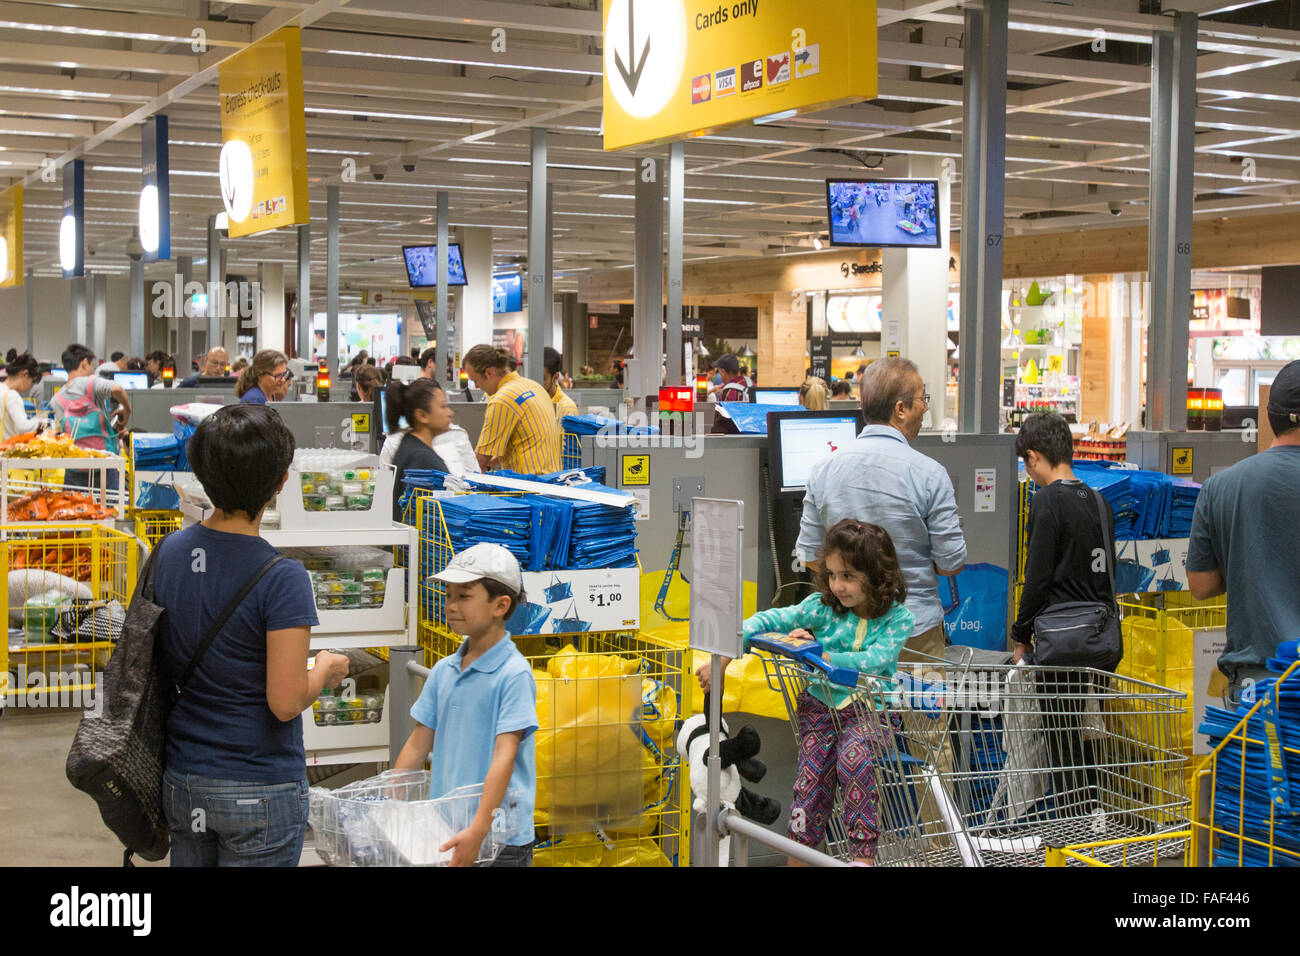 Express Checkout Till Ikea Furniture Store At Rhodes Shopping Centre In Sydney New South Wales Australia Stock Photo Alamy